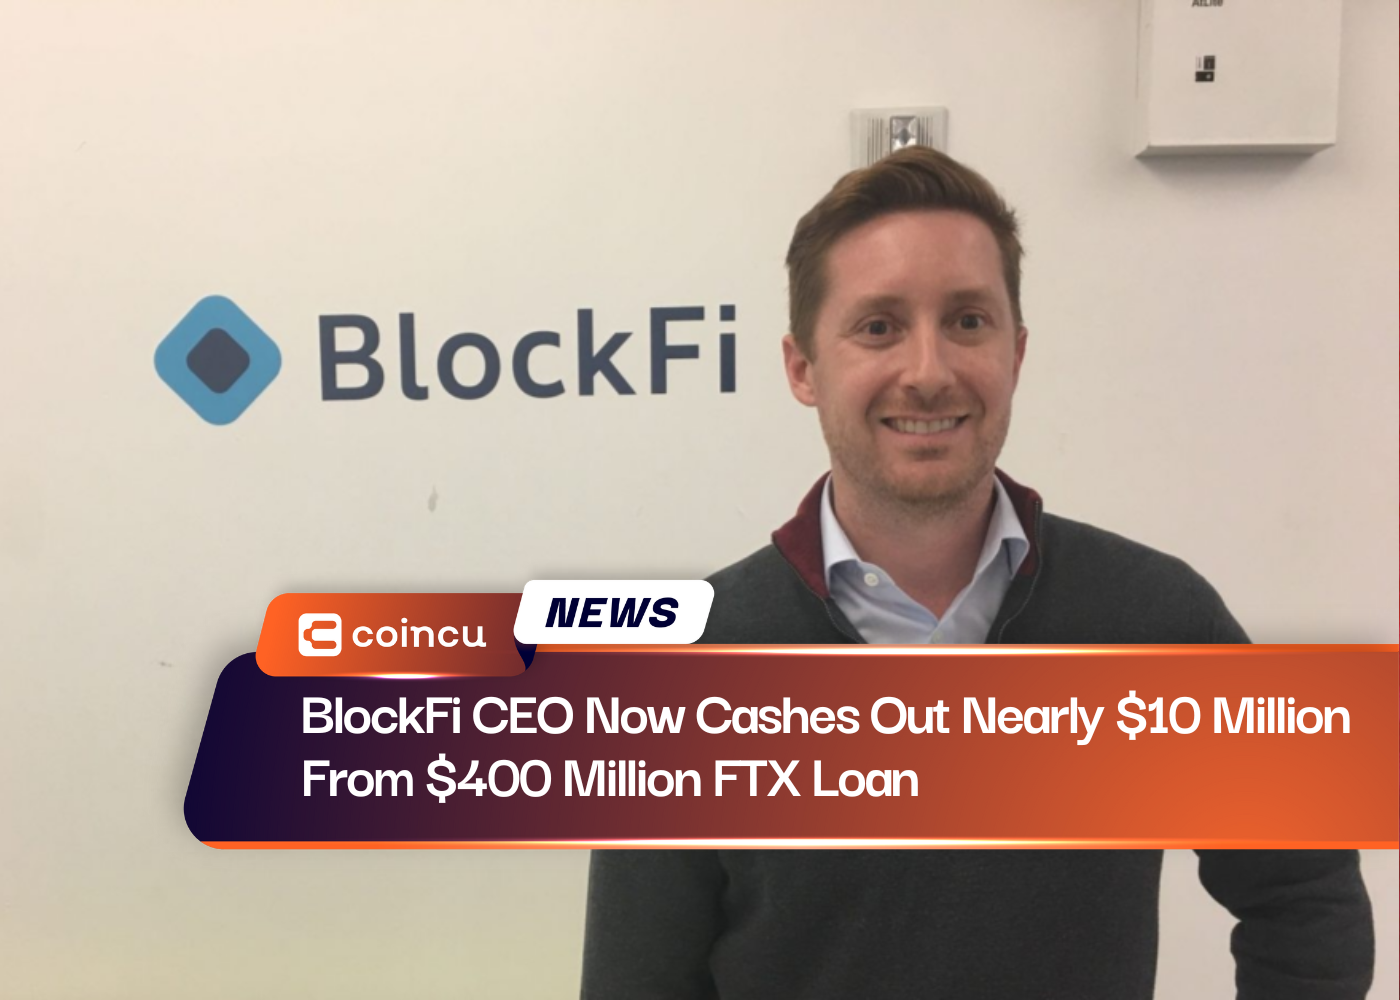 BlockFi CEO Now Cashes Out Nearly $10 Million From $400 Million FTX Loan